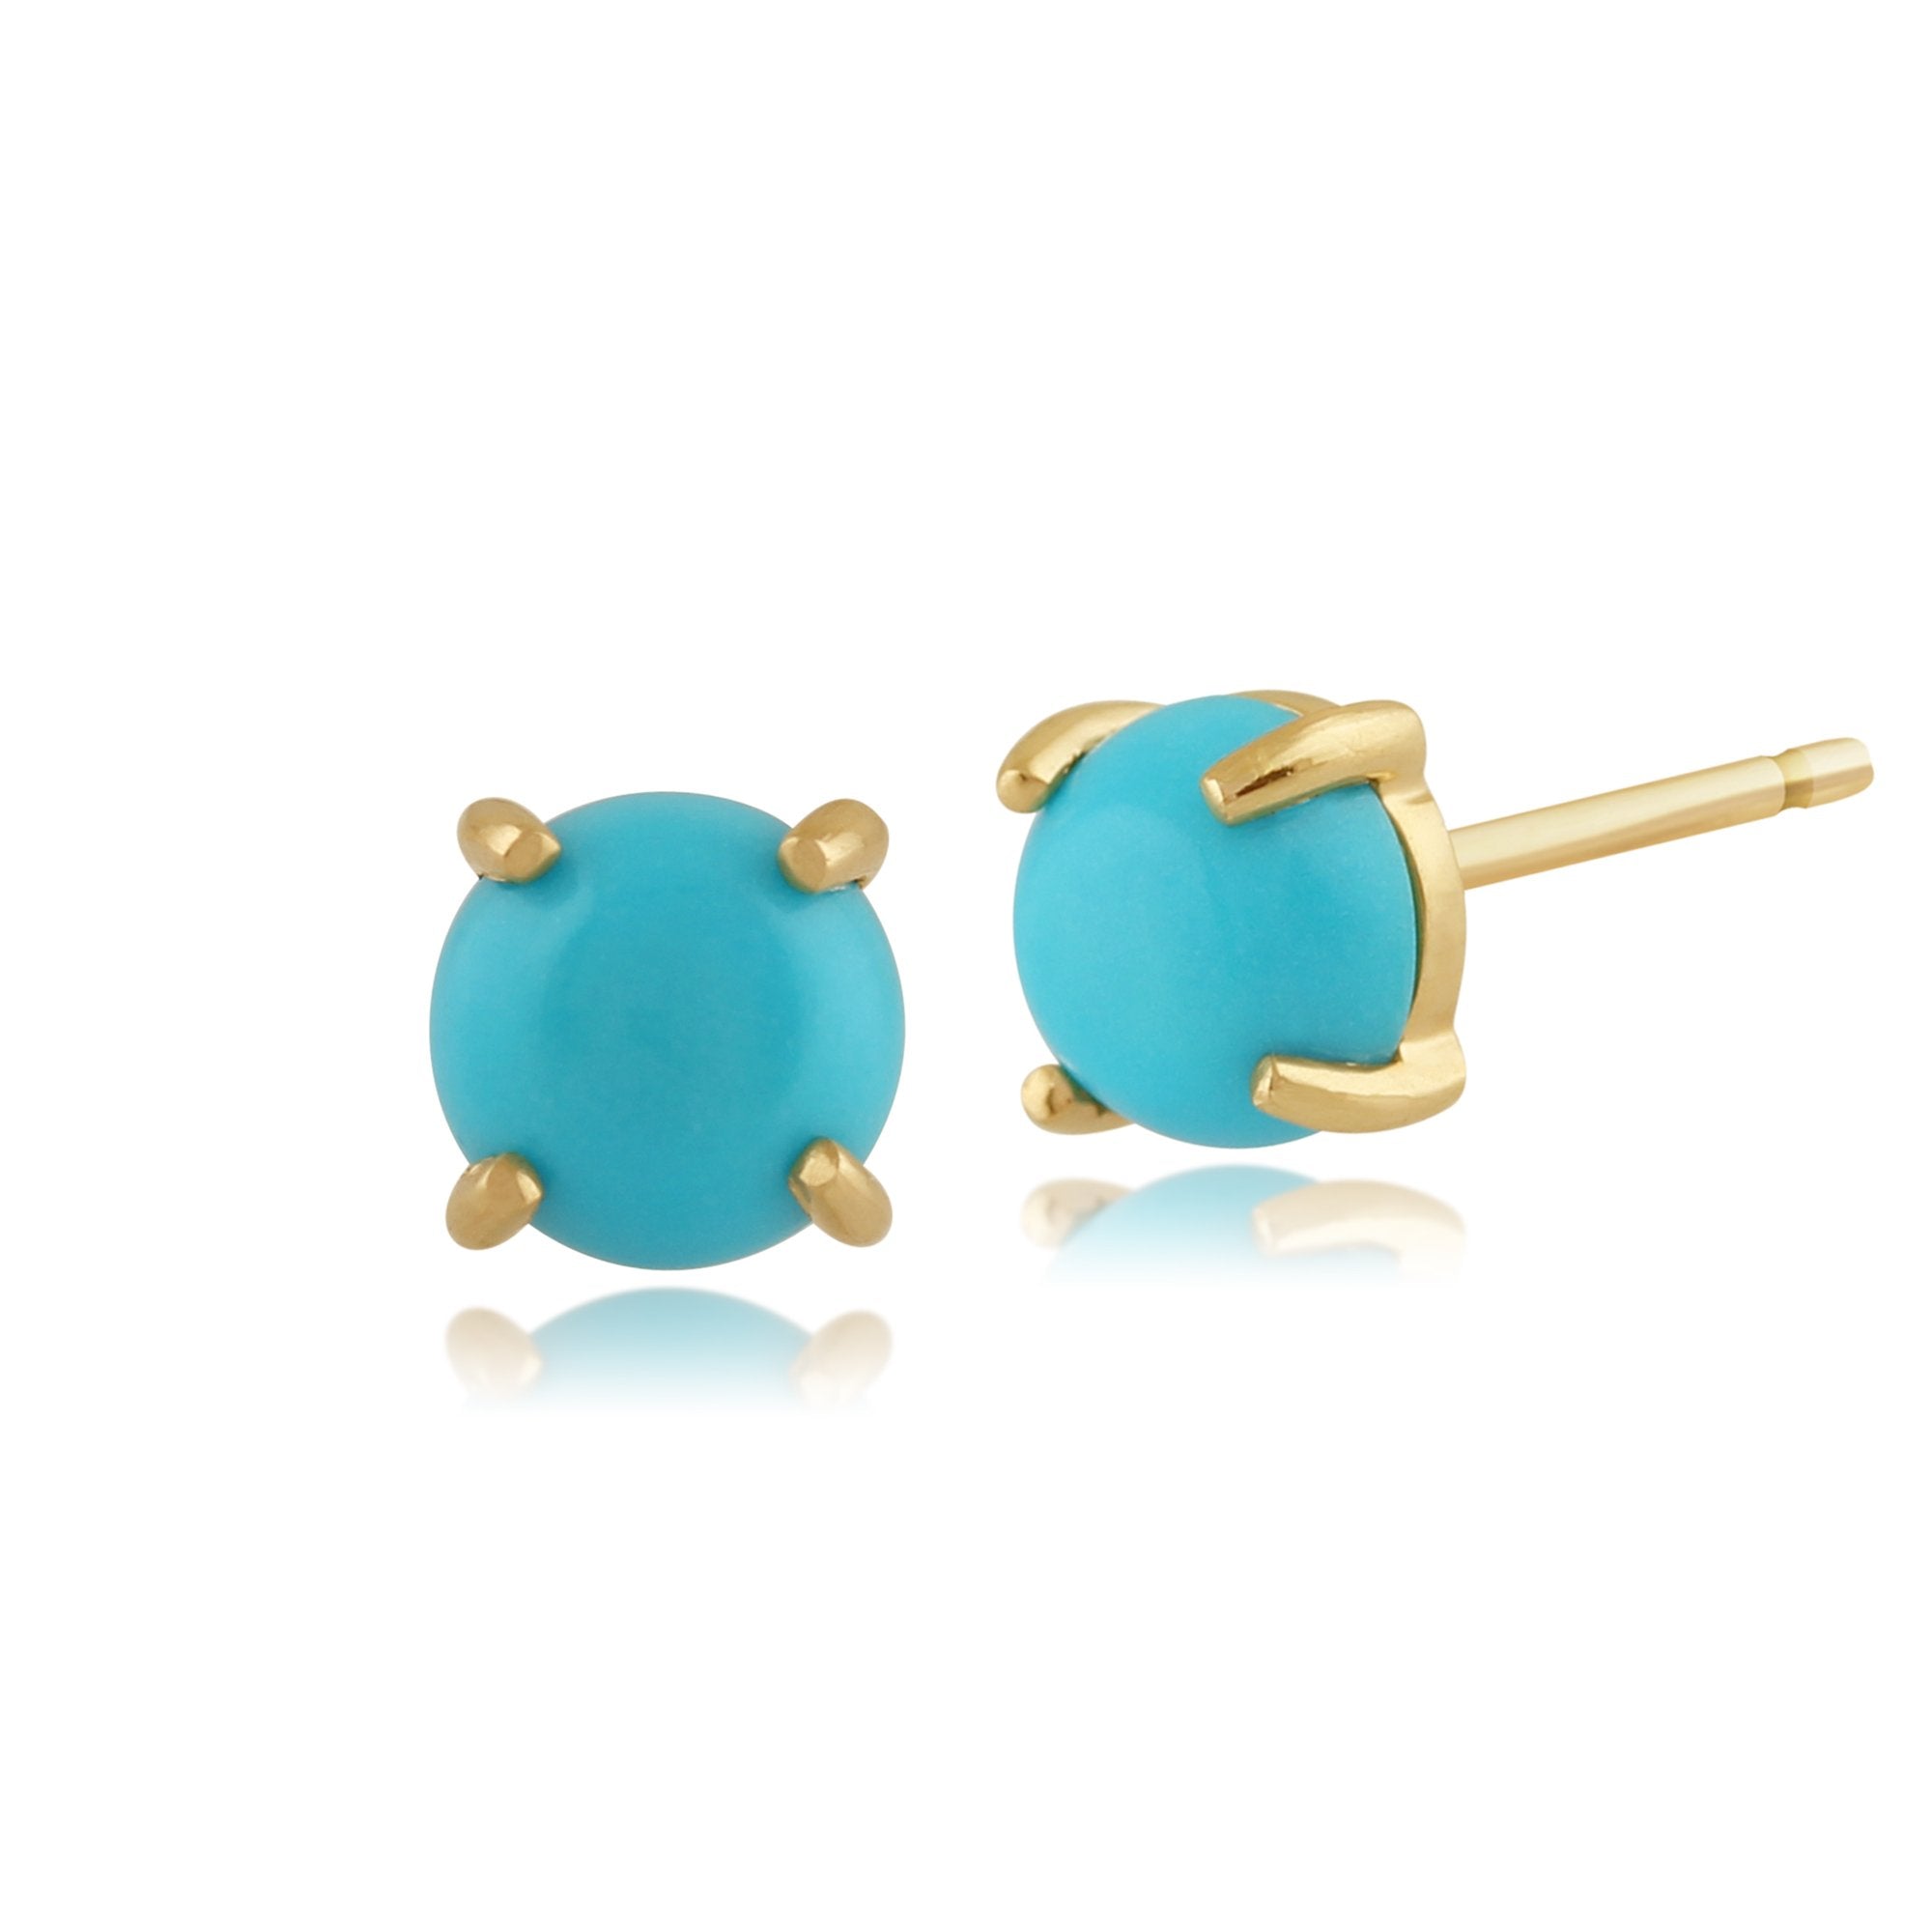 Classic Round Turquoise Cabochon Stud Earrings in 9ct Yellow Gold